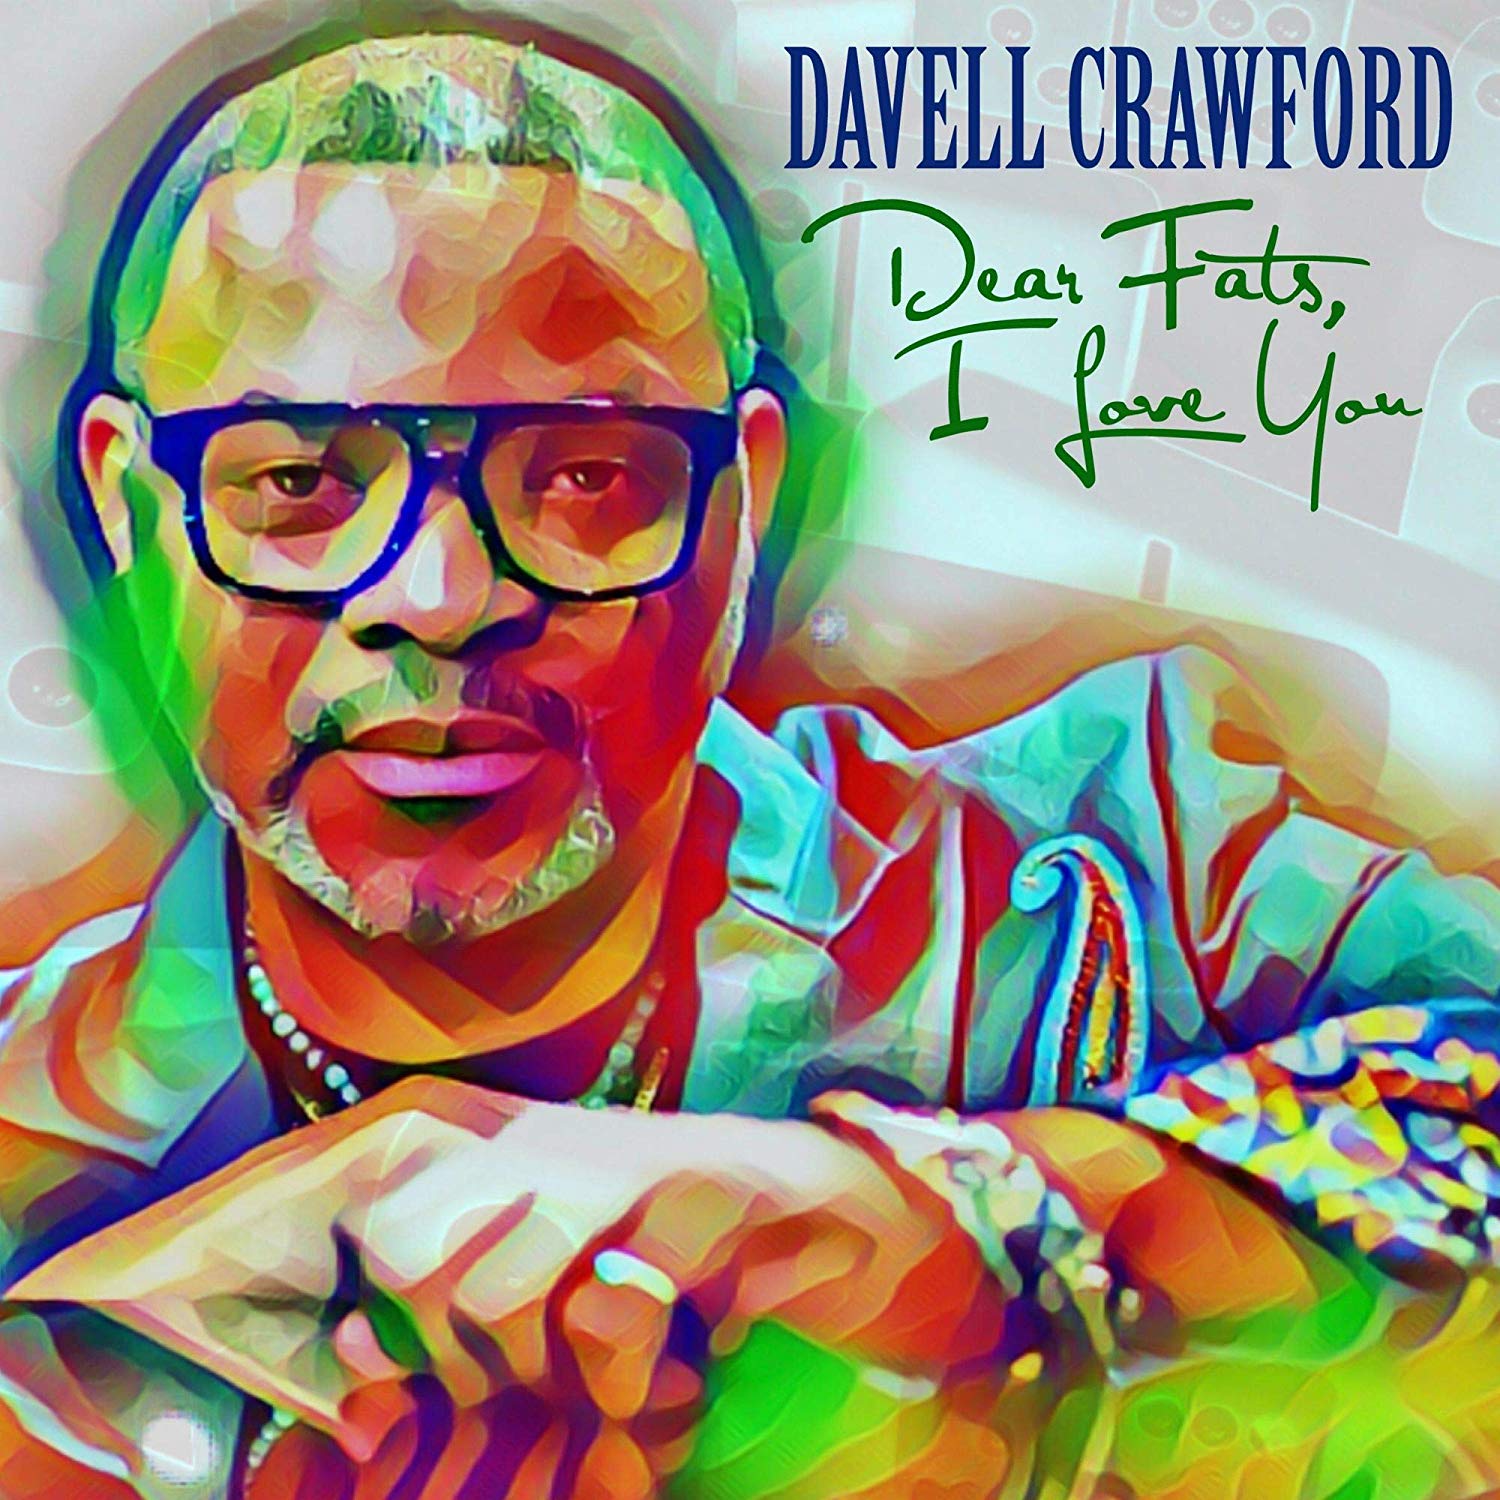 DAVELL CRAWFORD - Dear Fats, I Love You cover 